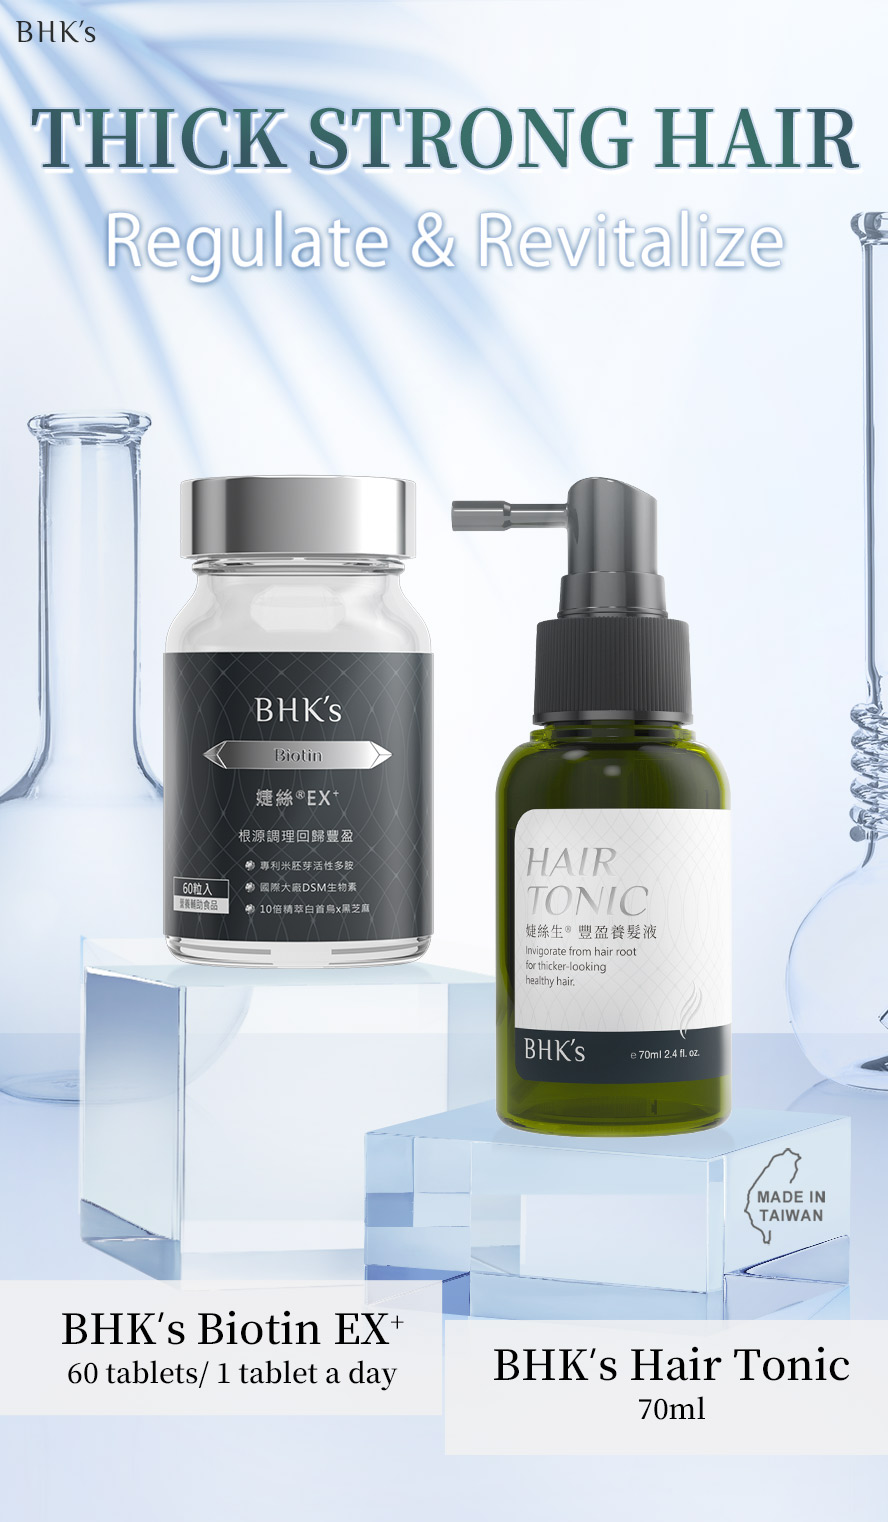 BHK's Biotin + Hair Tonic is the best hair care set for scalp regulation and revitalize hair growth for thick strong hair.